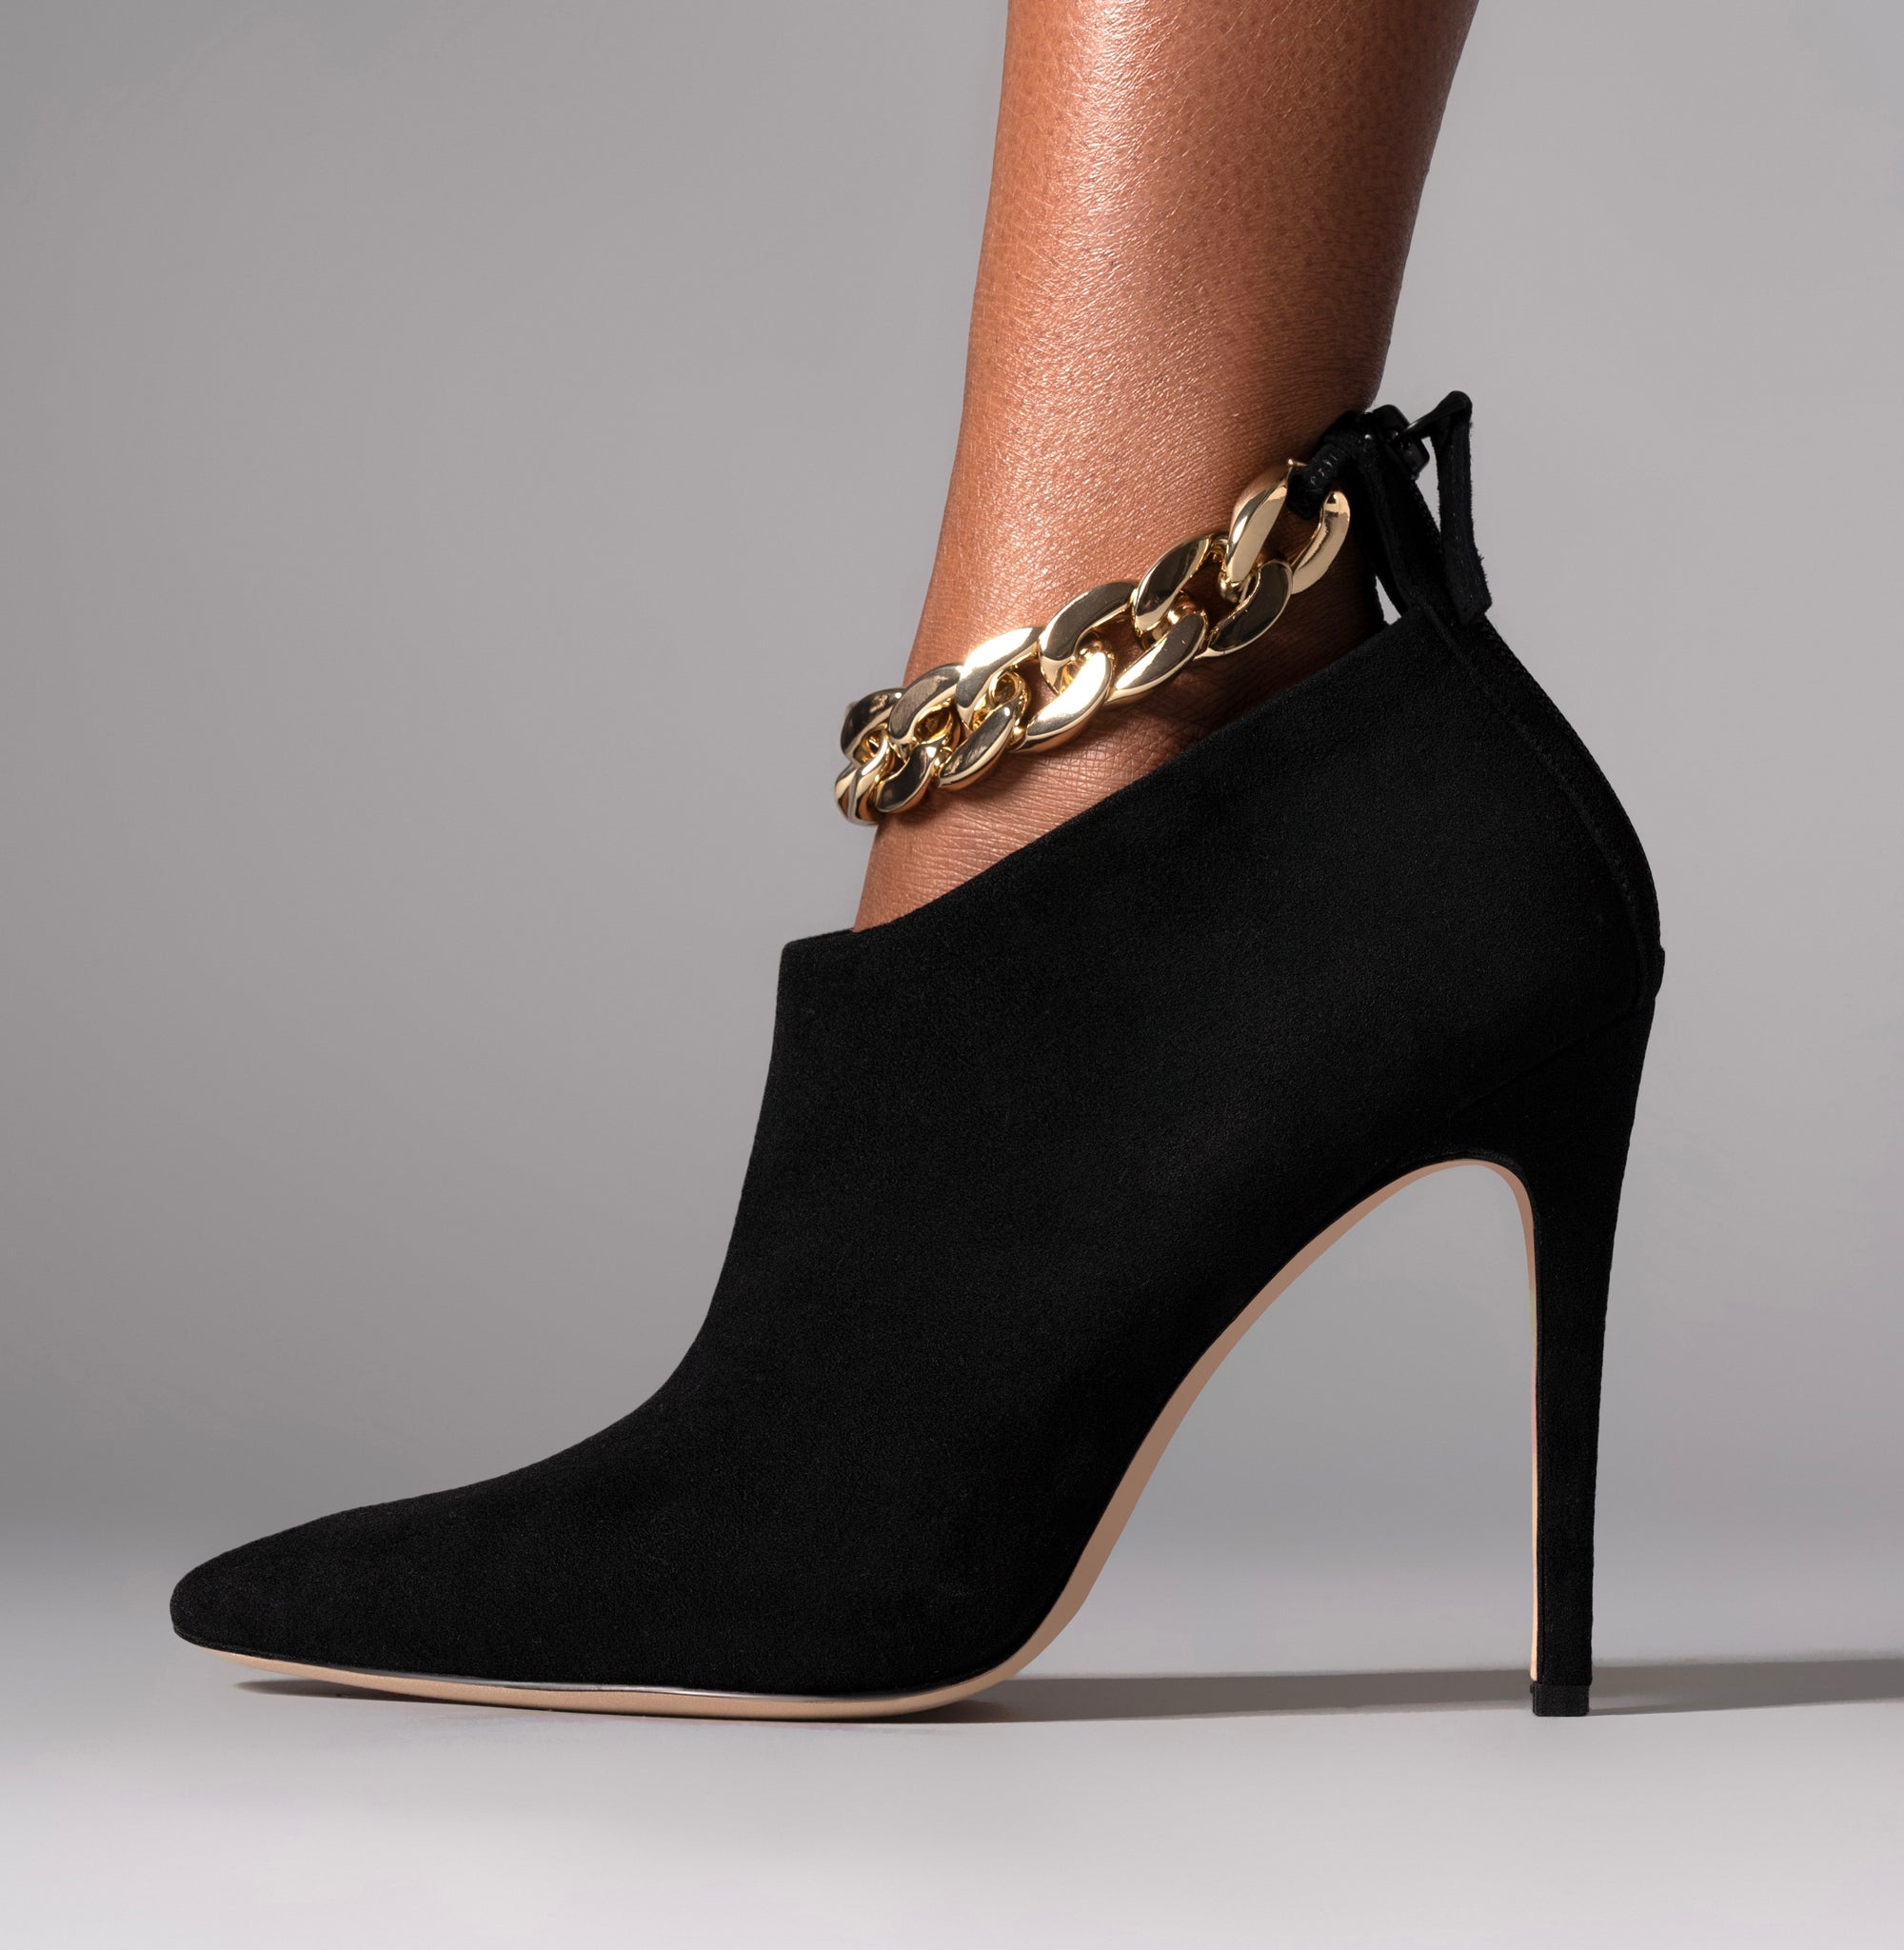 GOLD CHAIN BOOT